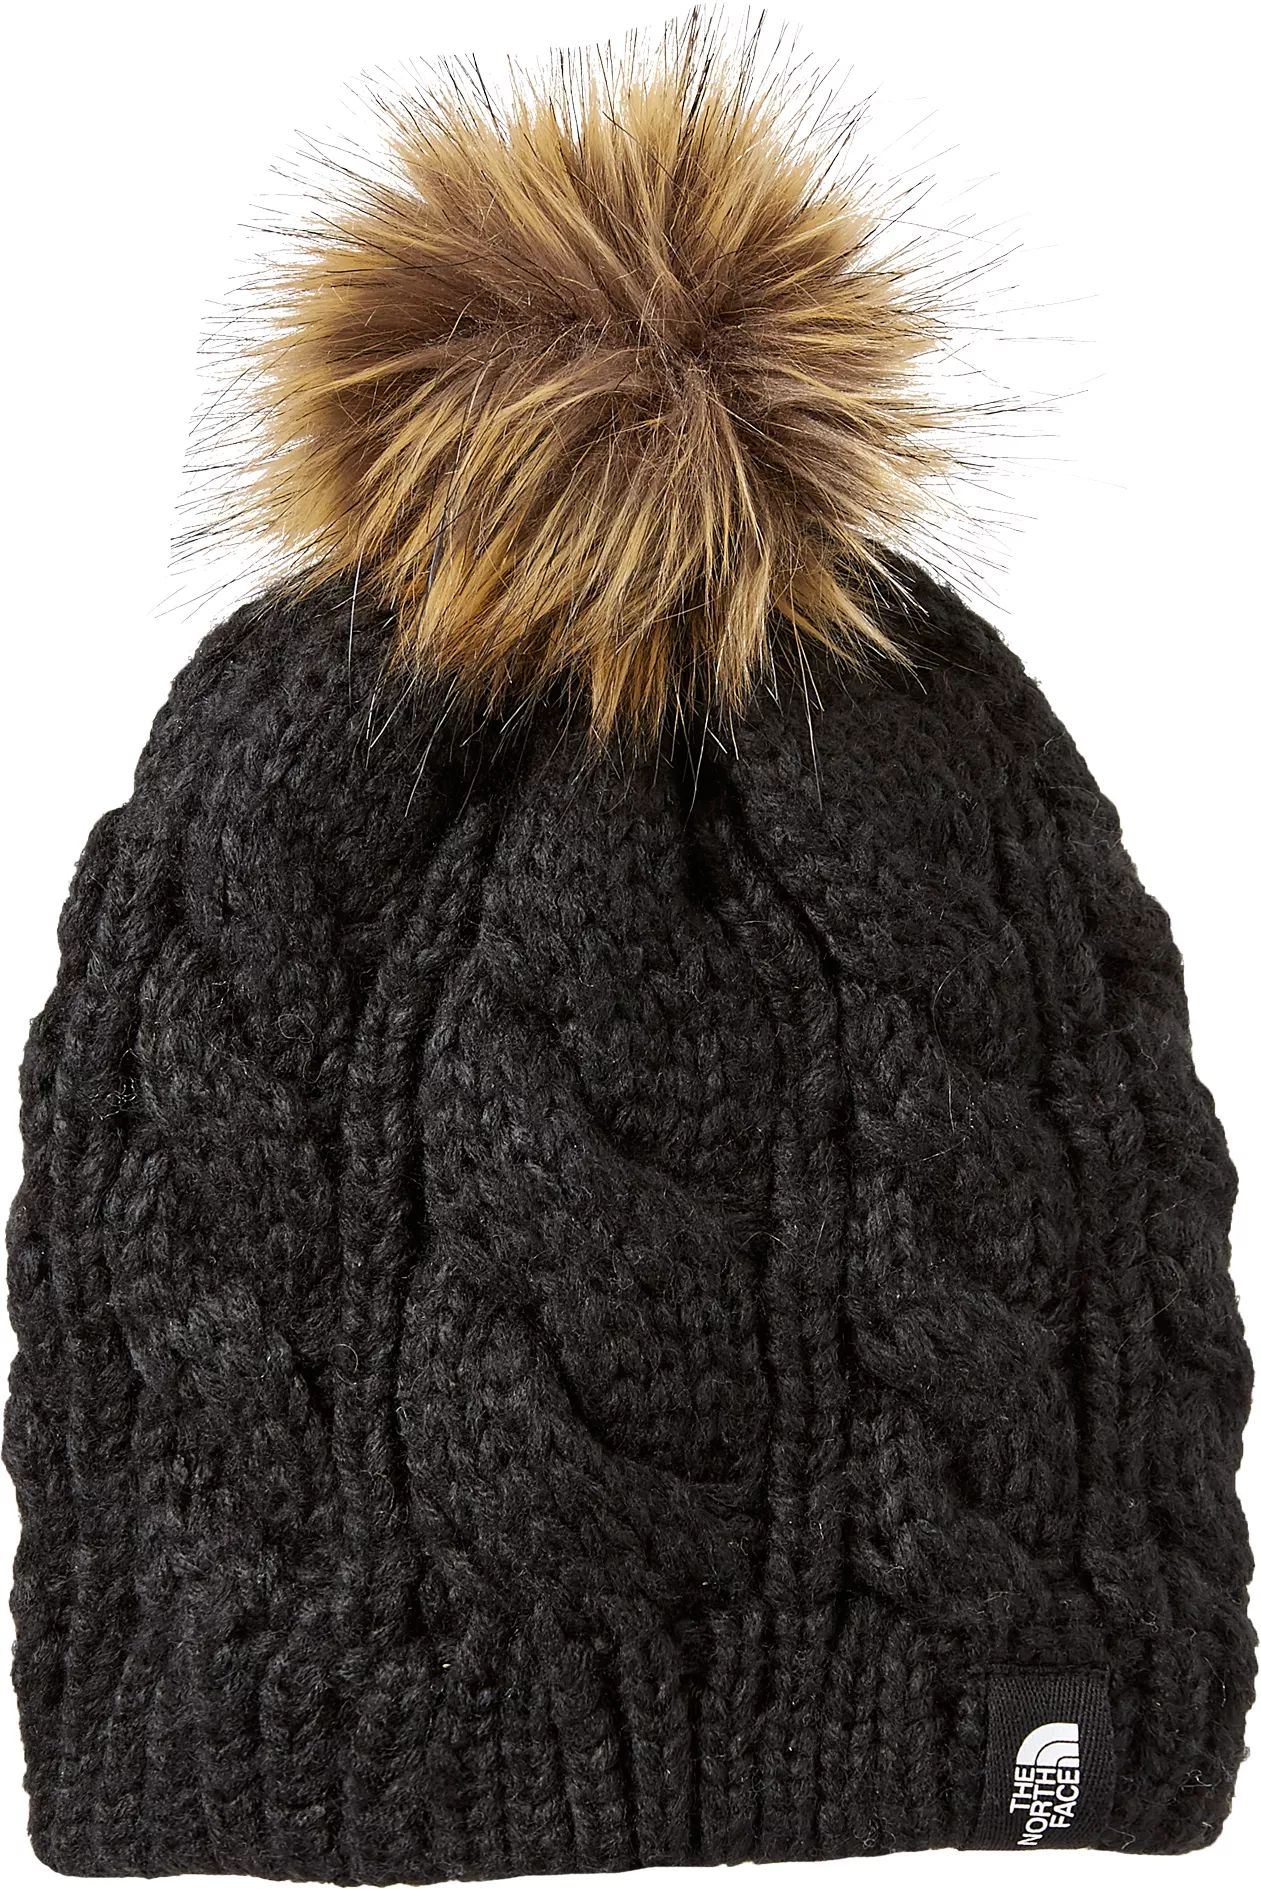 The North Face Youth Triple Cable Fur Pom Beanie, Kids Unisex, Size: Medium, Black | Dick's Sporting Goods